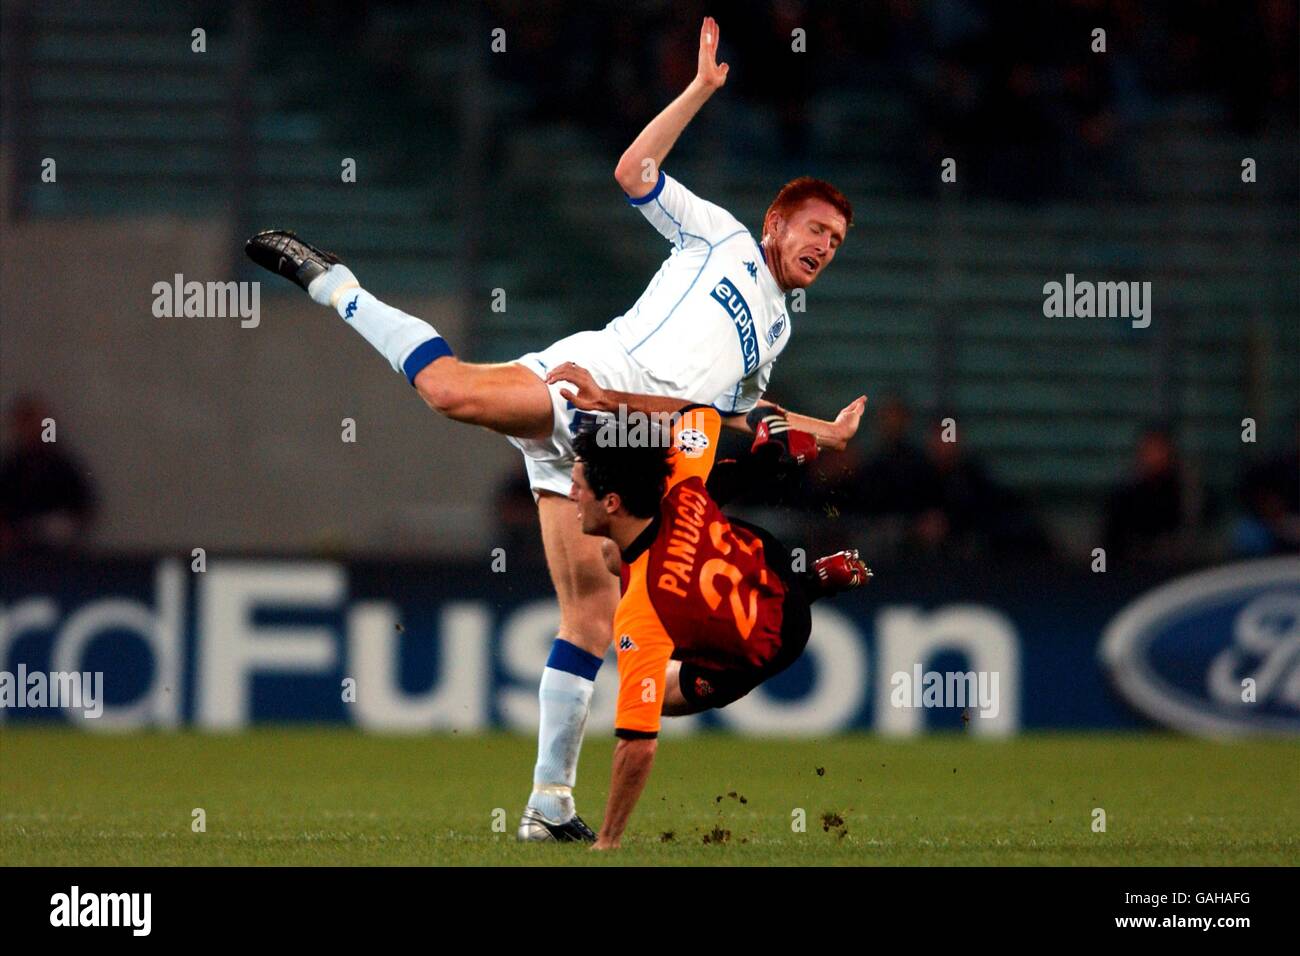 Soccer - UEFA Champions League - Group C - Roma v RC Genk. RC Genk's Bernd Thijs (top) and Roma's Christian Panucci battle for the ball Stock Photo